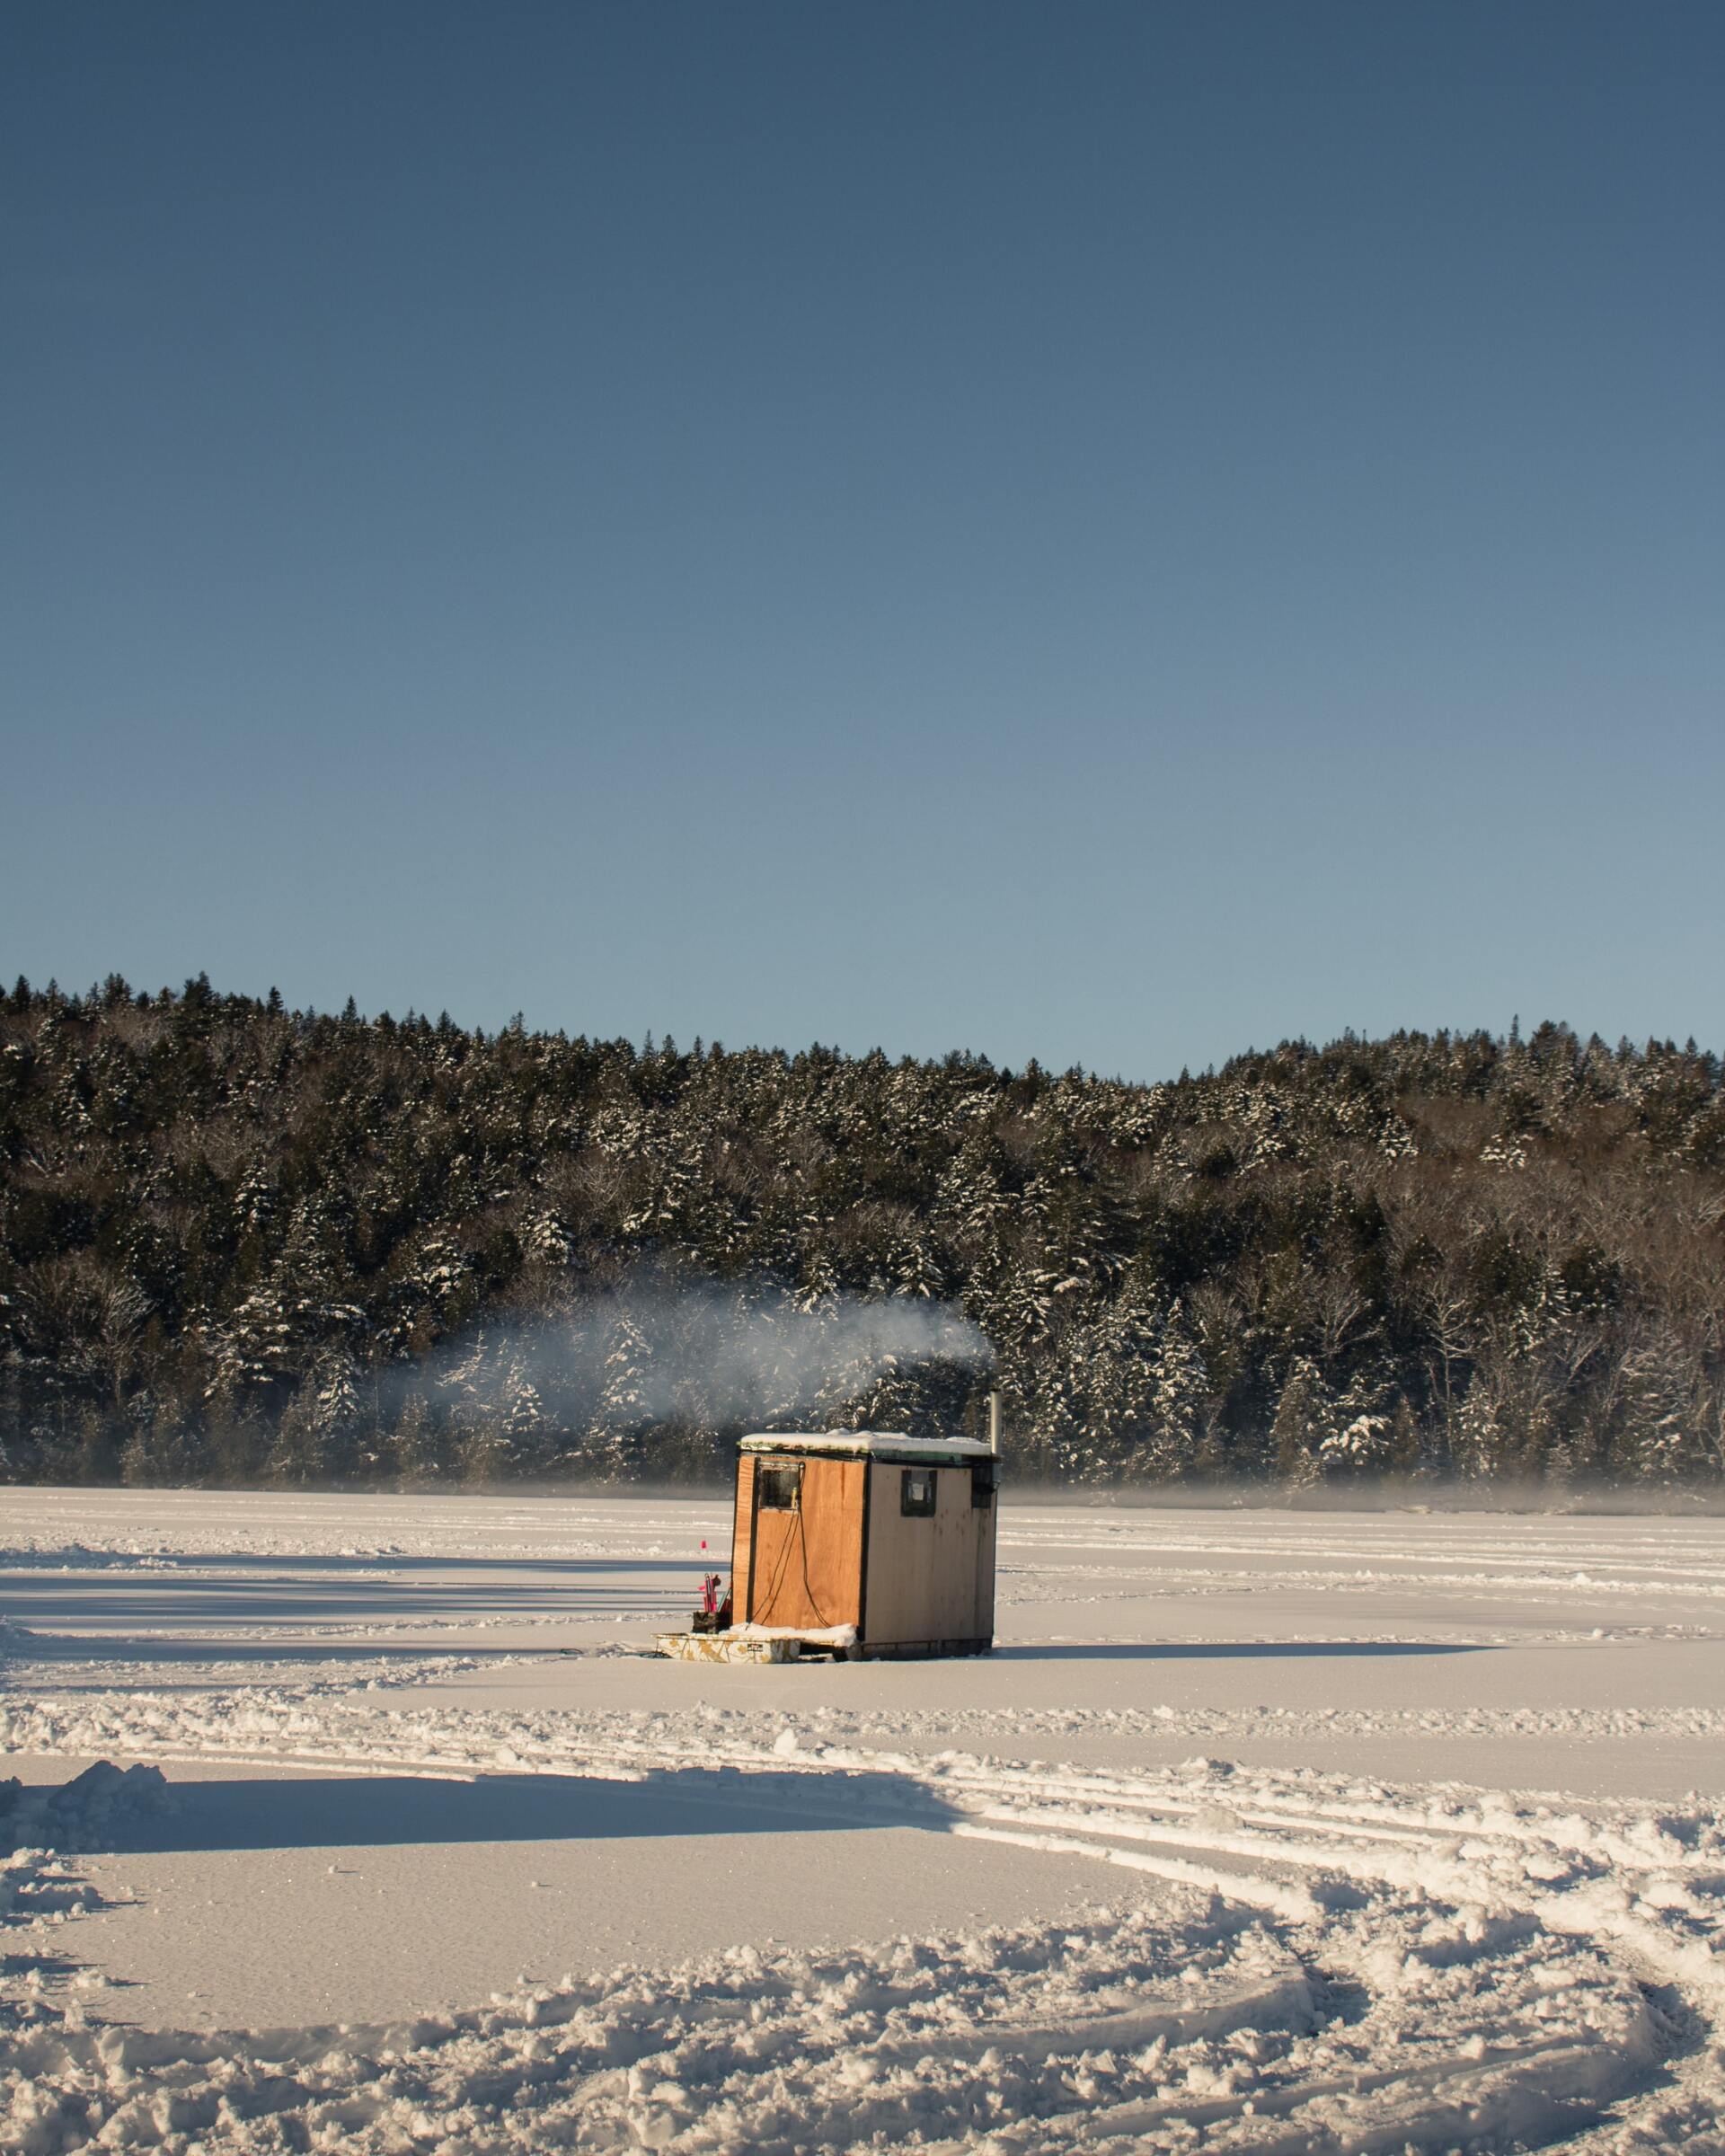 Ice fishing in Wisconsin is hot, hot hot